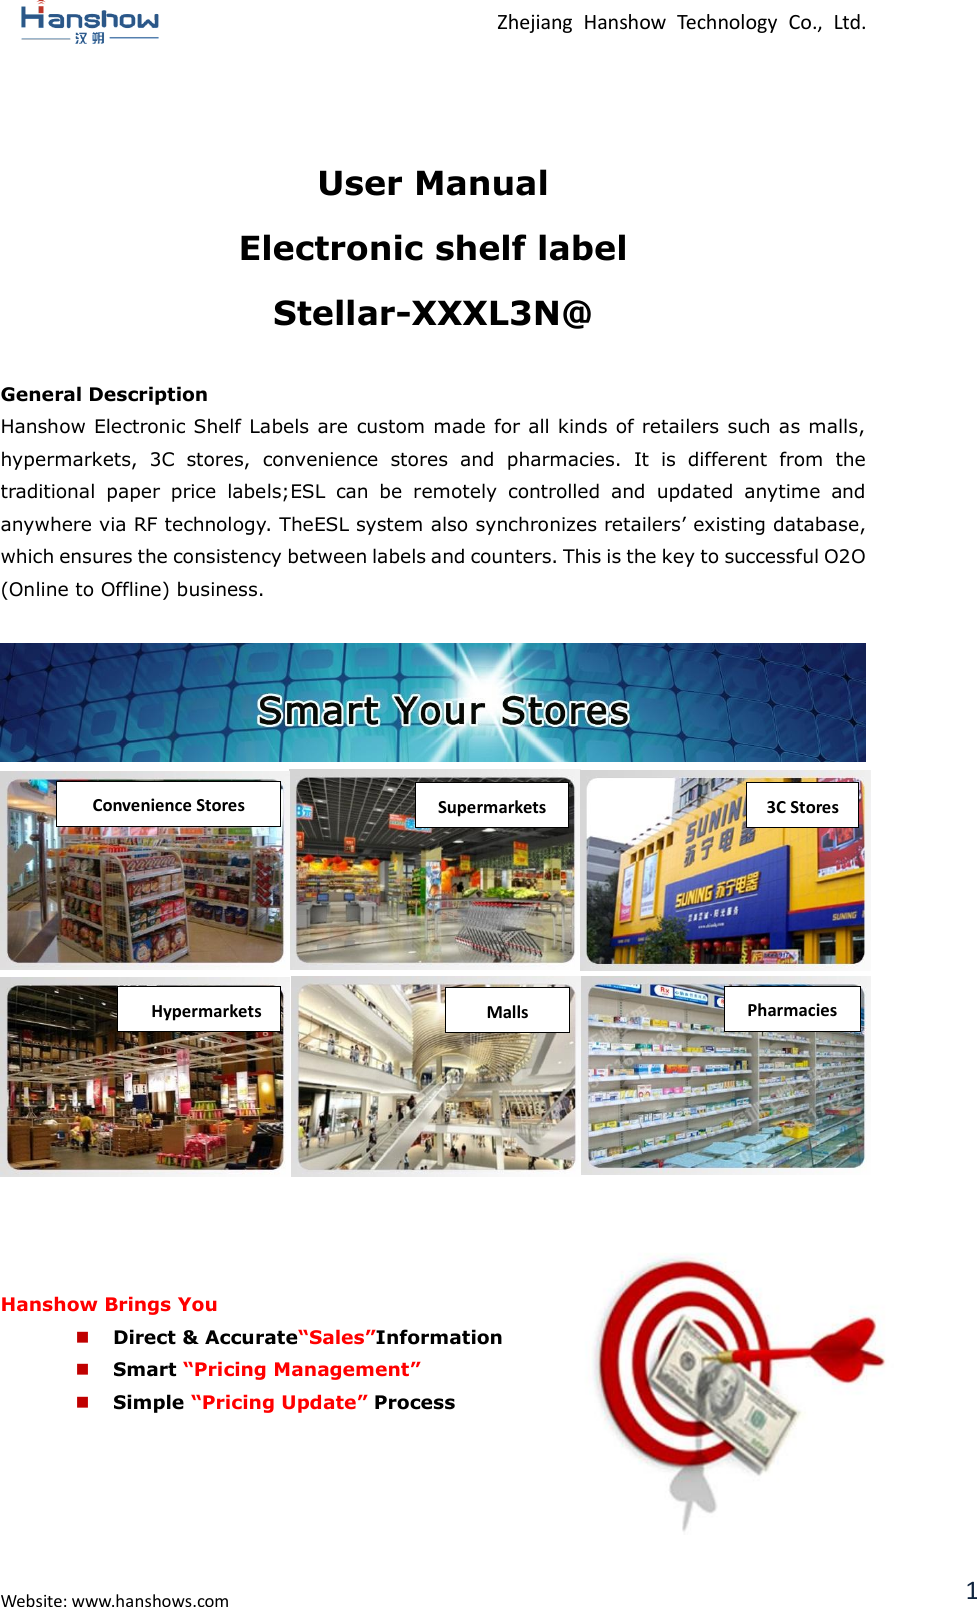  Zhejiang  Hanshow  Technology  Co.,  Ltd.   Website: www.hanshows.com 1  User Manual Electronic shelf label Stellar-XXXL3N@  General Description Hanshow Electronic Shelf Labels are custom made for all kinds of retailers such as malls, hypermarkets,  3C  stores,  convenience  stores  and  pharmacies.  It  is  different  from  the traditional  paper  price  labels;ESL  can  be  remotely  controlled  and  updated  anytime  and anywhere via RF technology. TheESL system also synchronizes retailers’ existing database, which ensures the consistency between labels and counters. This is the key to successful O2O (Online to Offline) business.                     Hanshow Brings You  Direct &amp; Accurate“Sales”Information  Smart “Pricing Management”  Simple “Pricing Update” Process      Convenience Stores Supermarkets 3C Stores Pharmacies Malls Hypermarkets G-MALL 